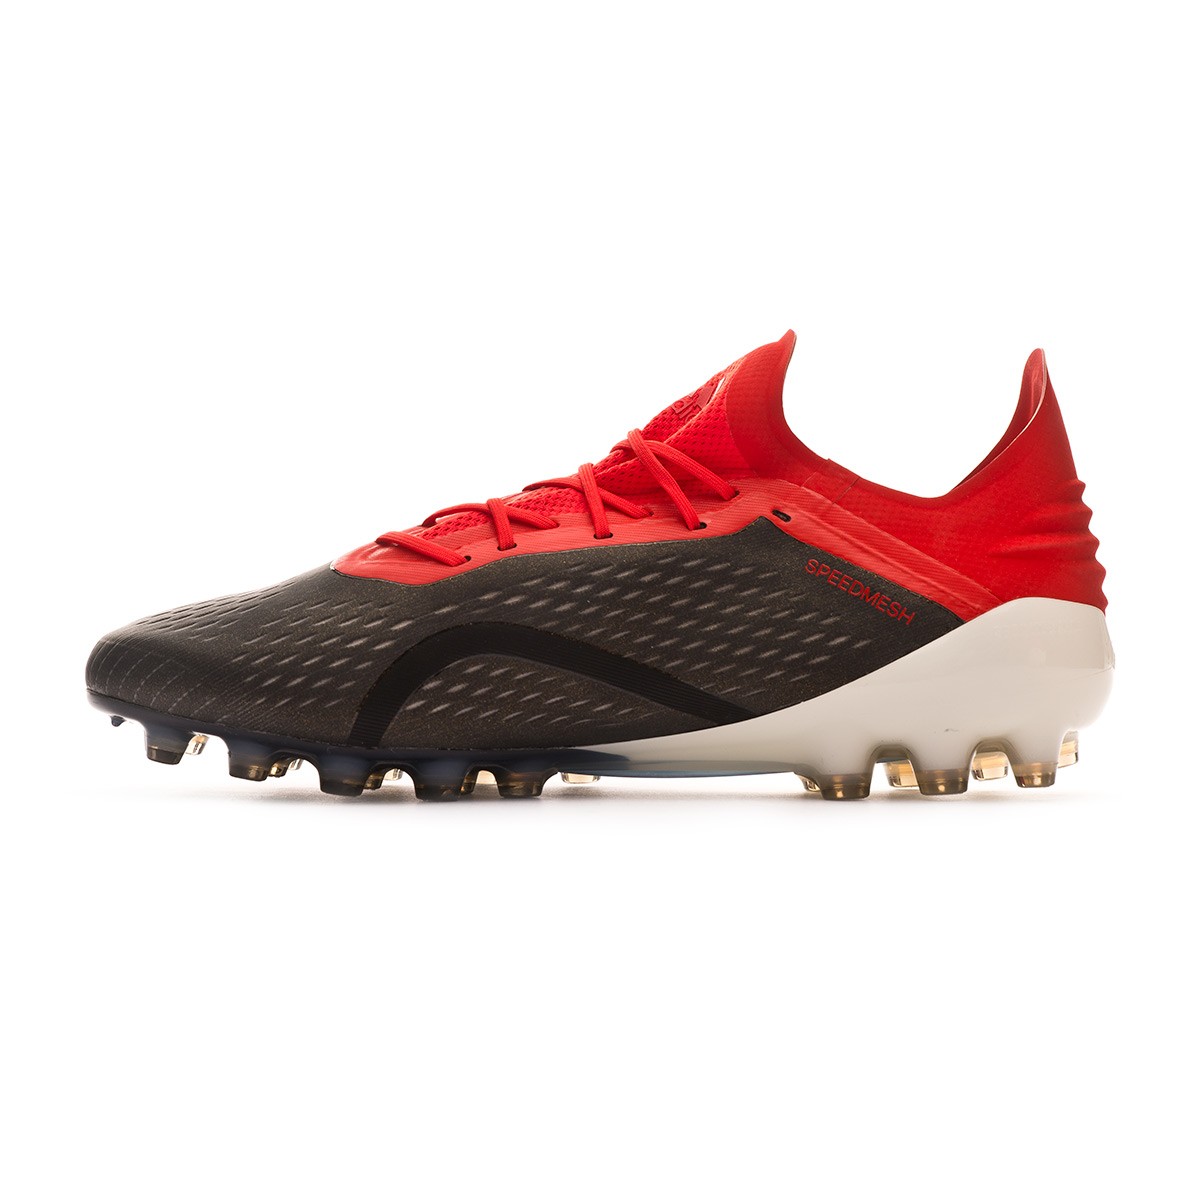 adidas x 18.1 red and black